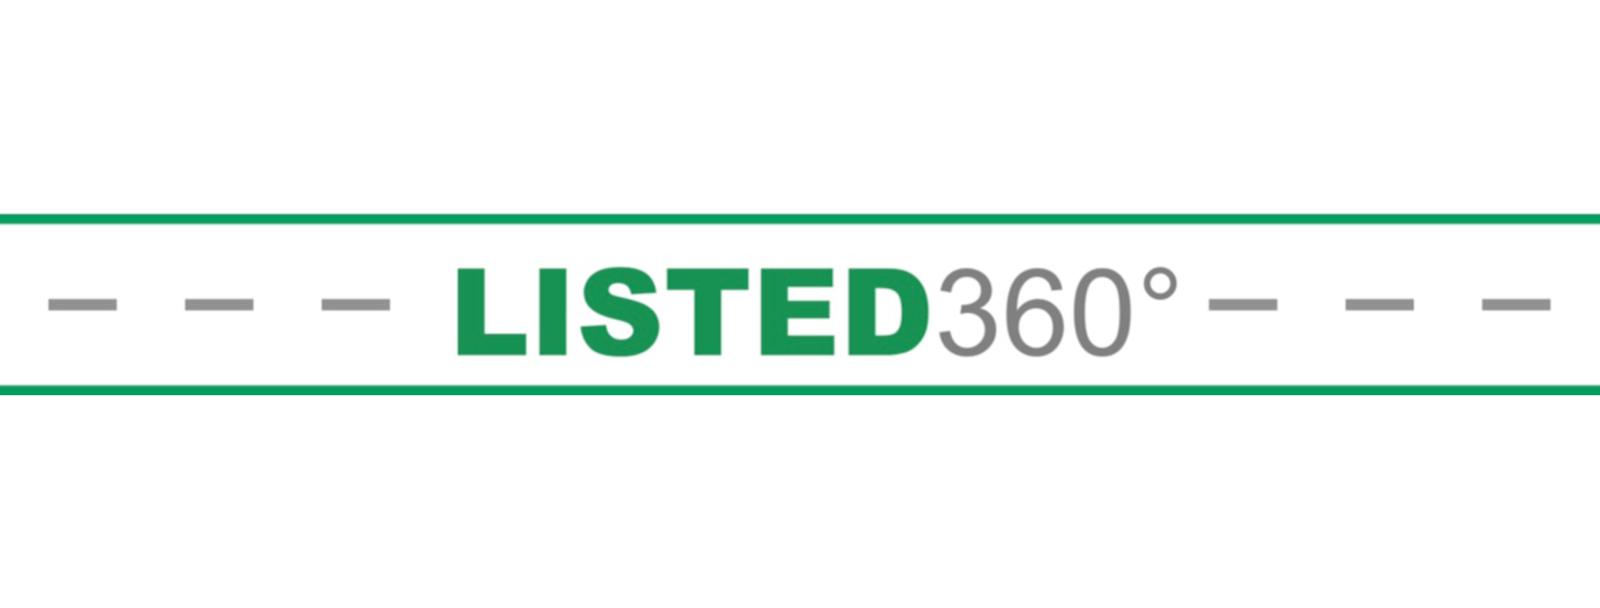 Listed 360